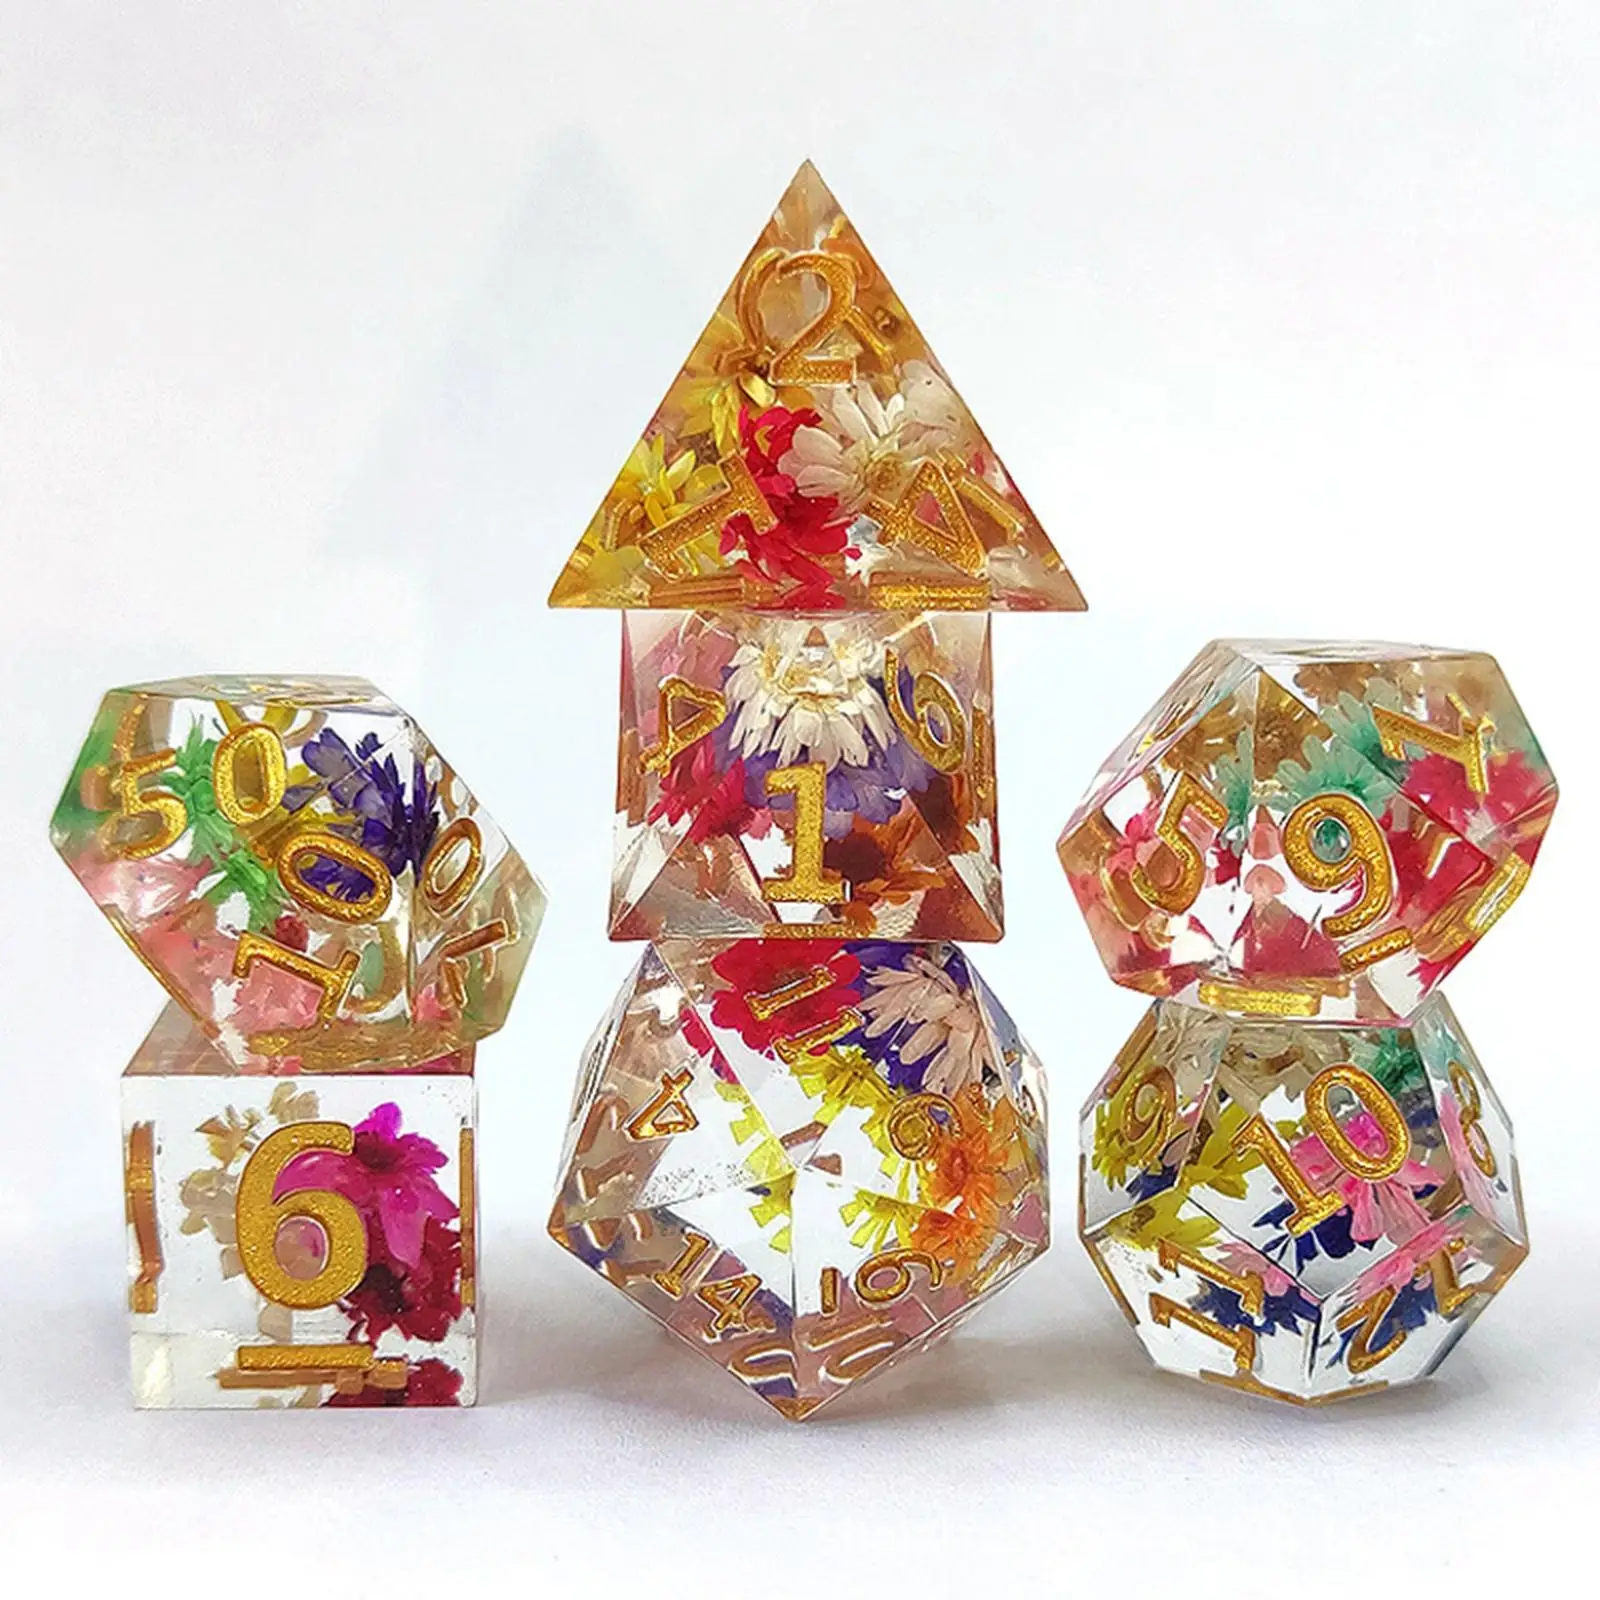 7pcs Multi Sided Dice Built-in Flower Pattern D4 D6 D8 2xd10 D12 D20 For Dnd Rpg Board Games Accessories Role Playing Bulk